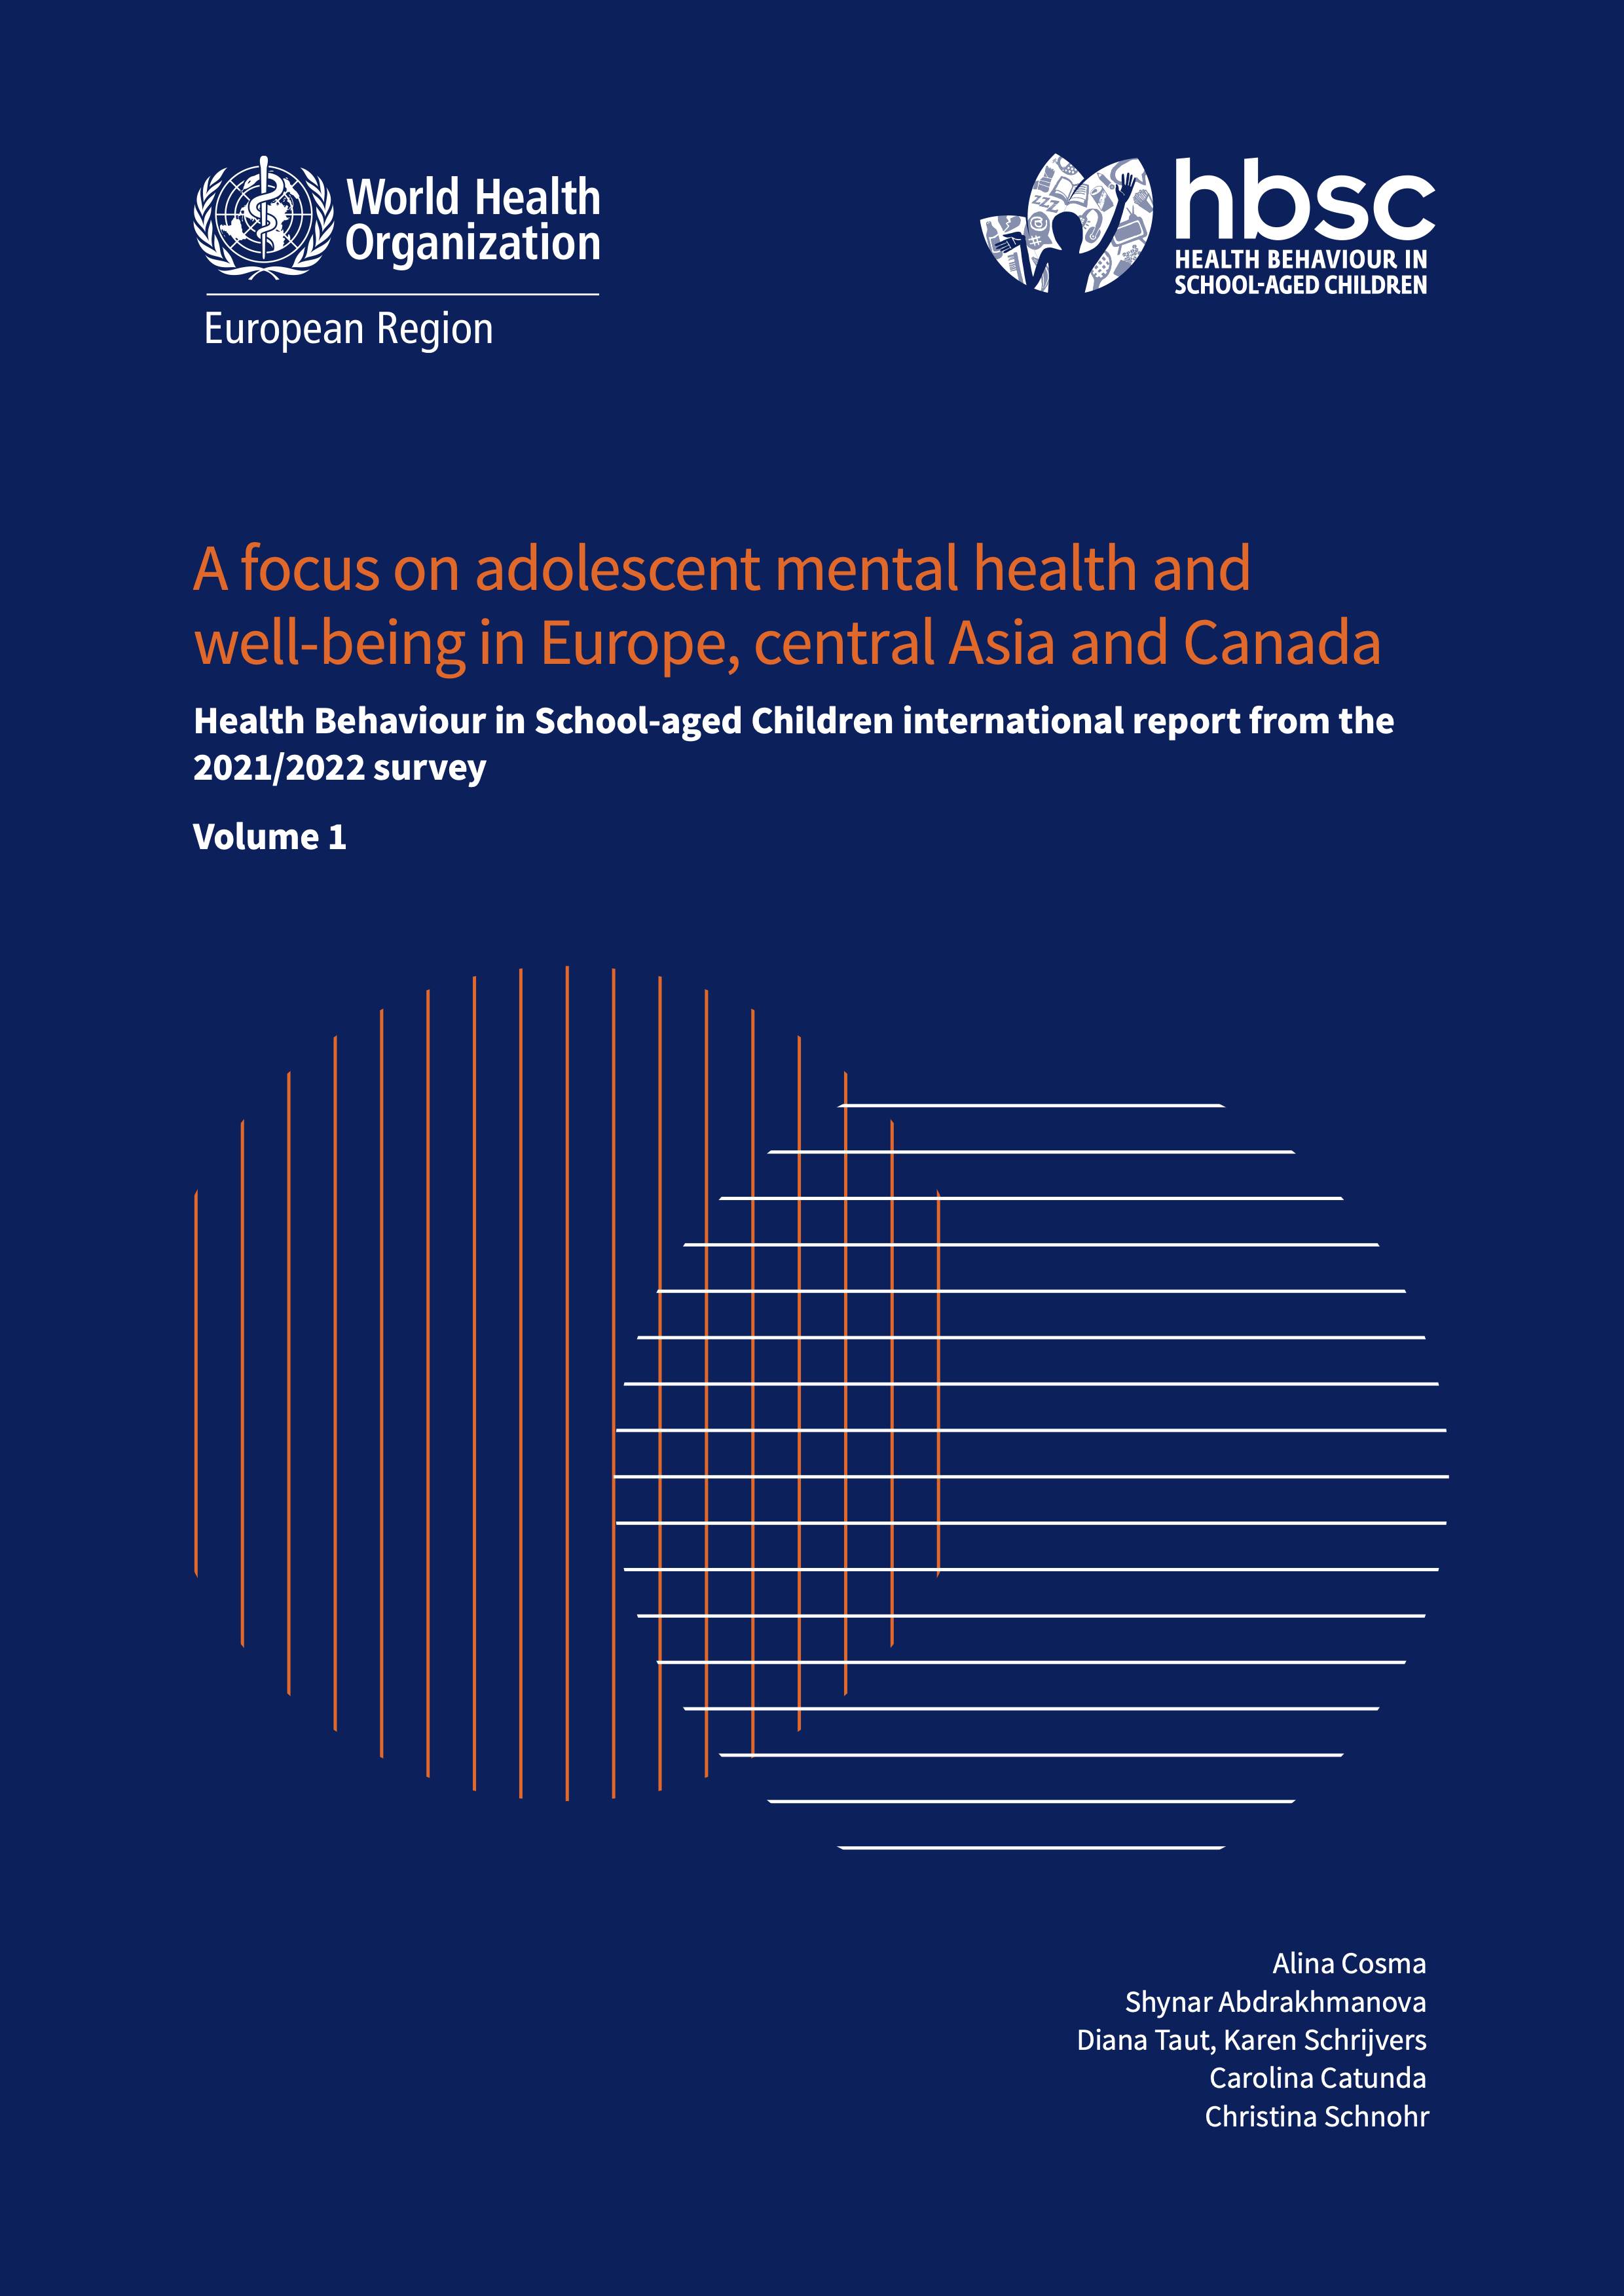 Cover of volume 1. HBSC study first international report volume on mental health and well-being.